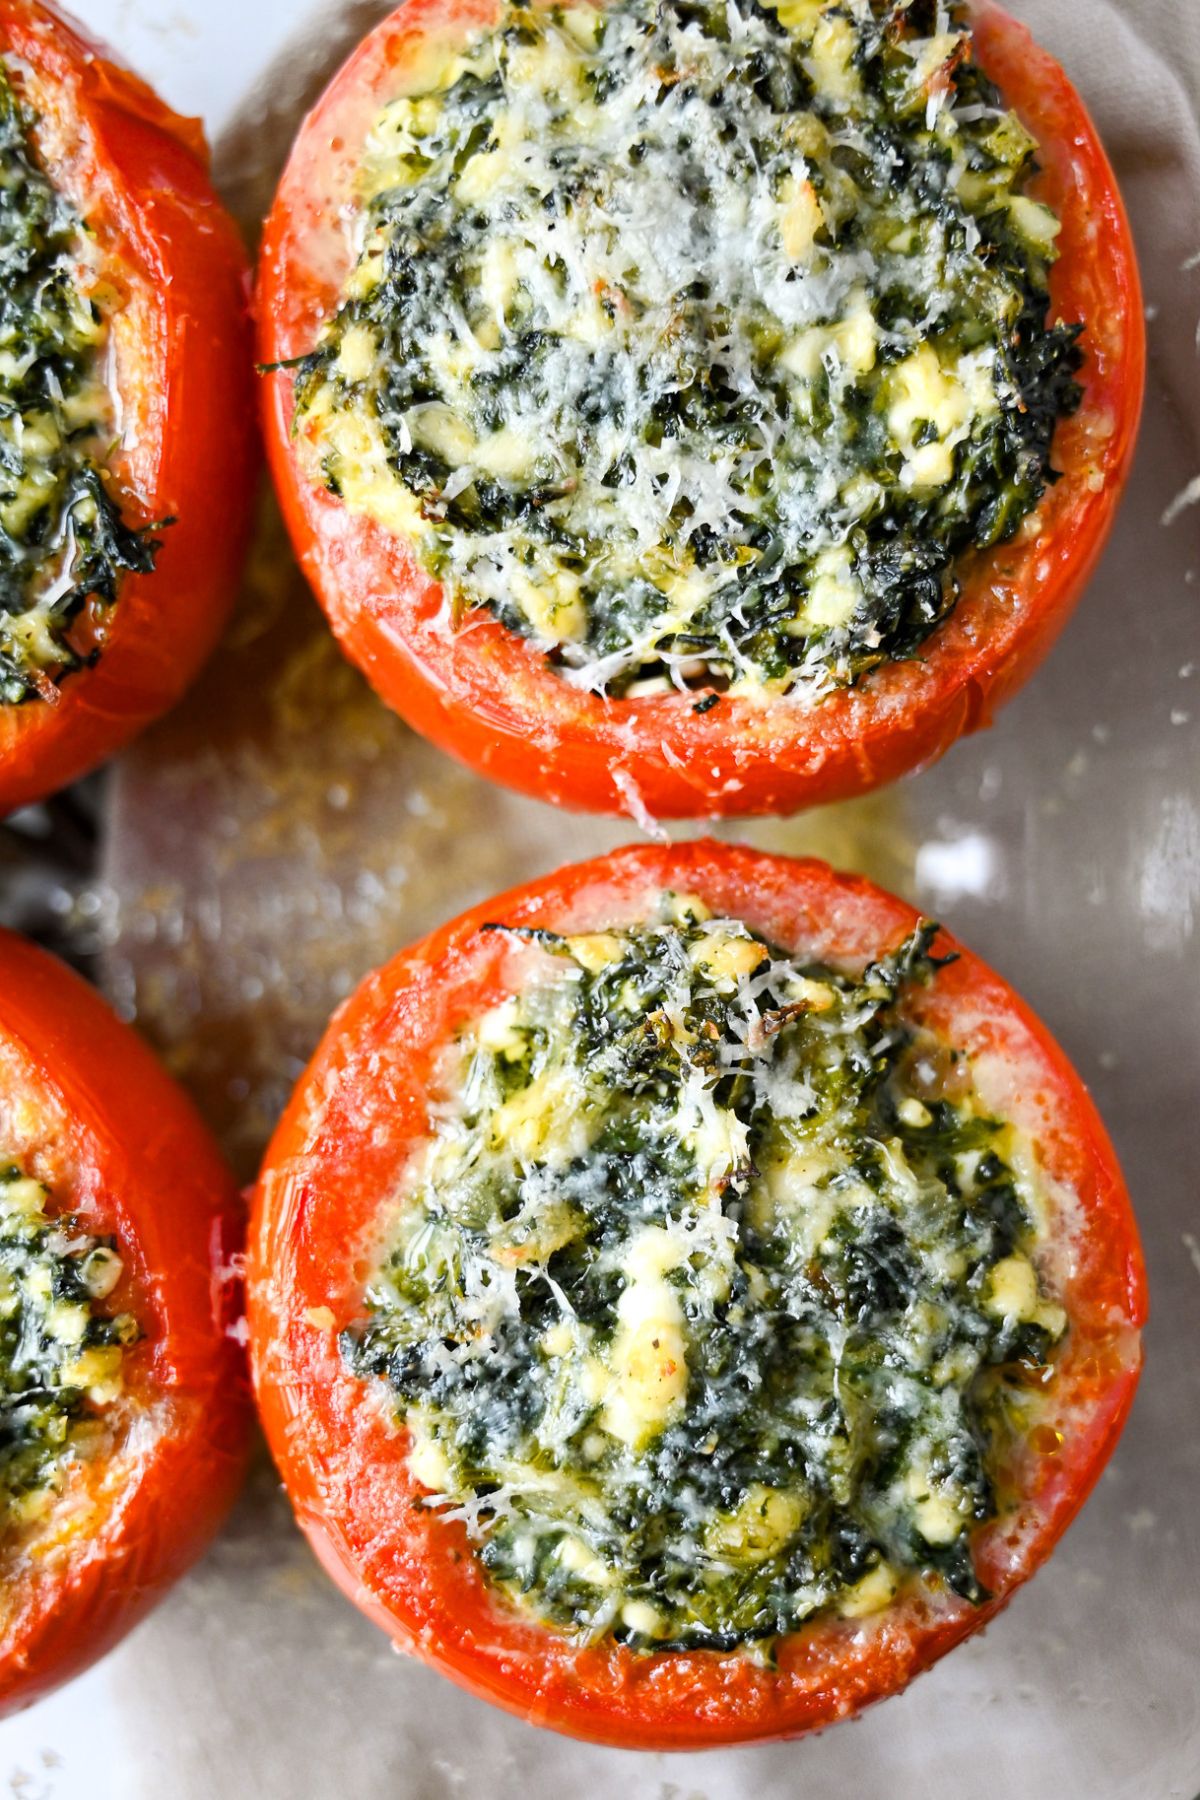 spinach and cottage cheese stuffed tomatoes with melted parmesan on top fresh from the oven in a baking dish